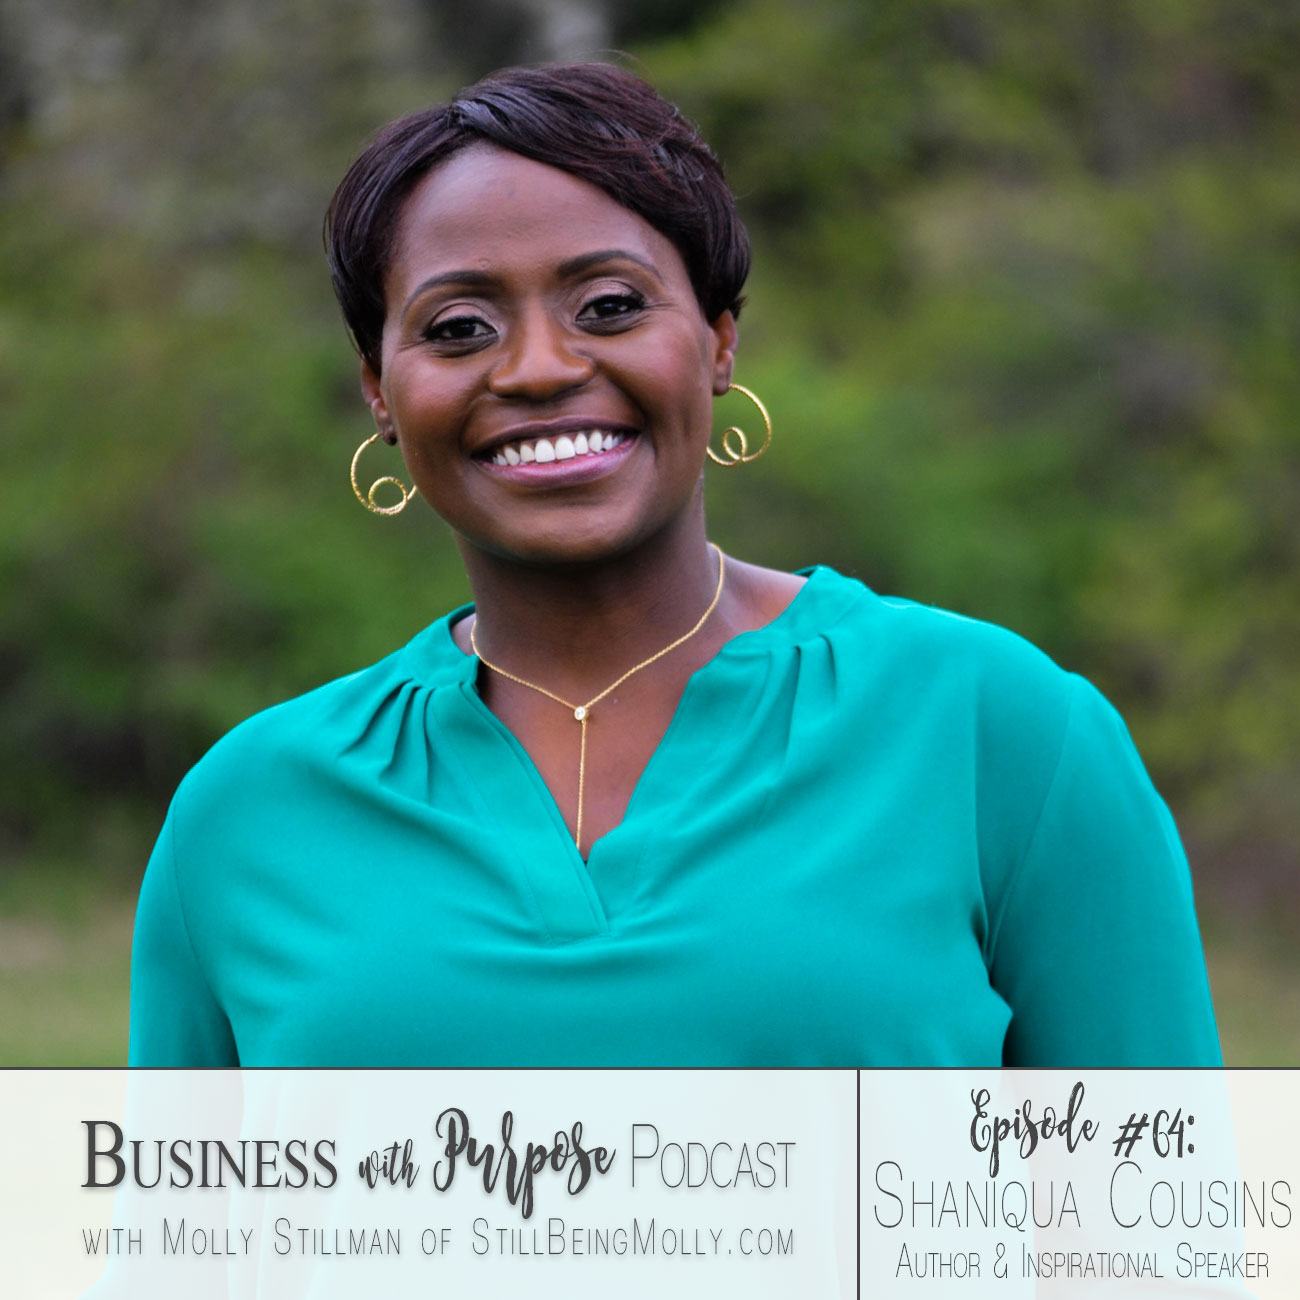 Business with Purpose Podcast EP 64: Shaniqua Cousins by North Carolina ethical blogger Still Being Molly